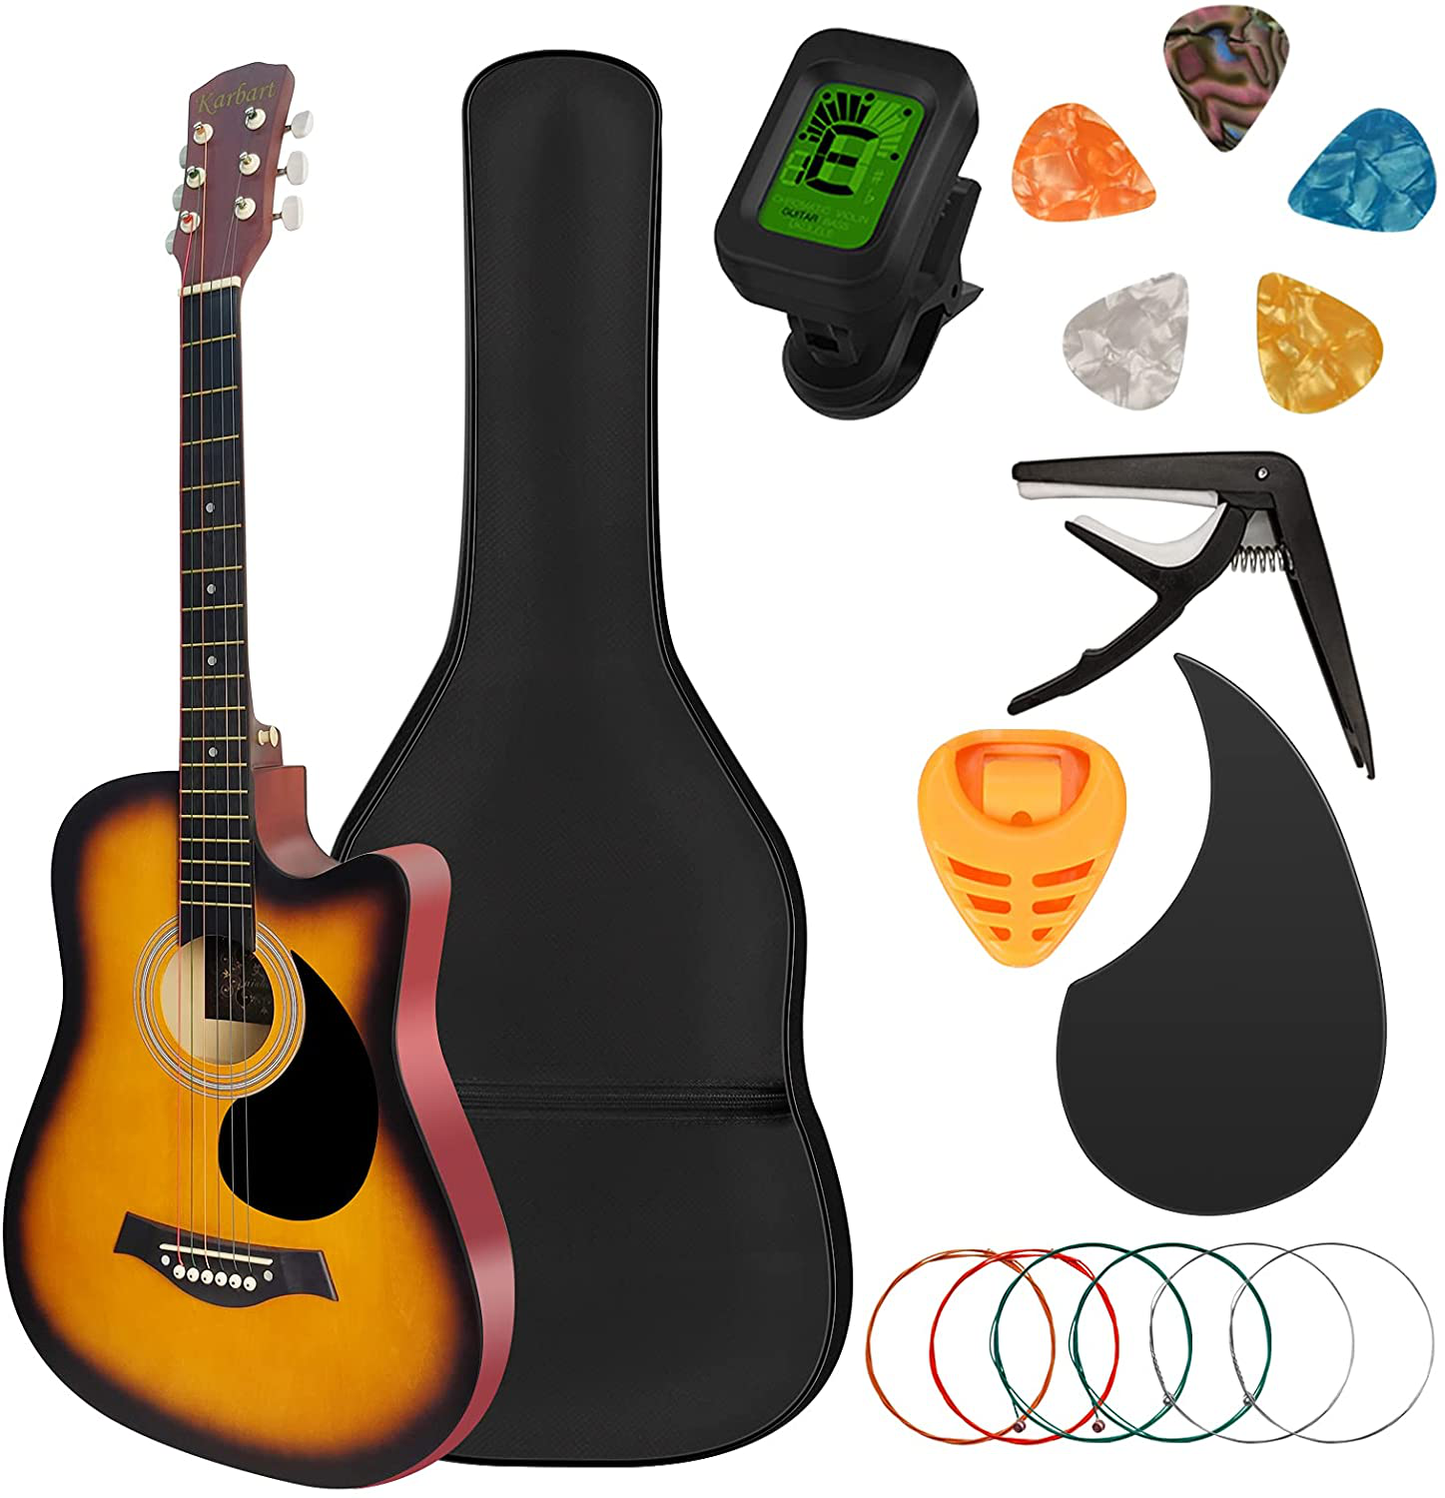 Karbart 38In Wood Acoustic Guitar Starter Kit for Beginners with Guitar Accessories Package,5 Pcs Guitar Picks,Guitar Tuner,Guitar Bag,Guitar Strap,Guitar Strings